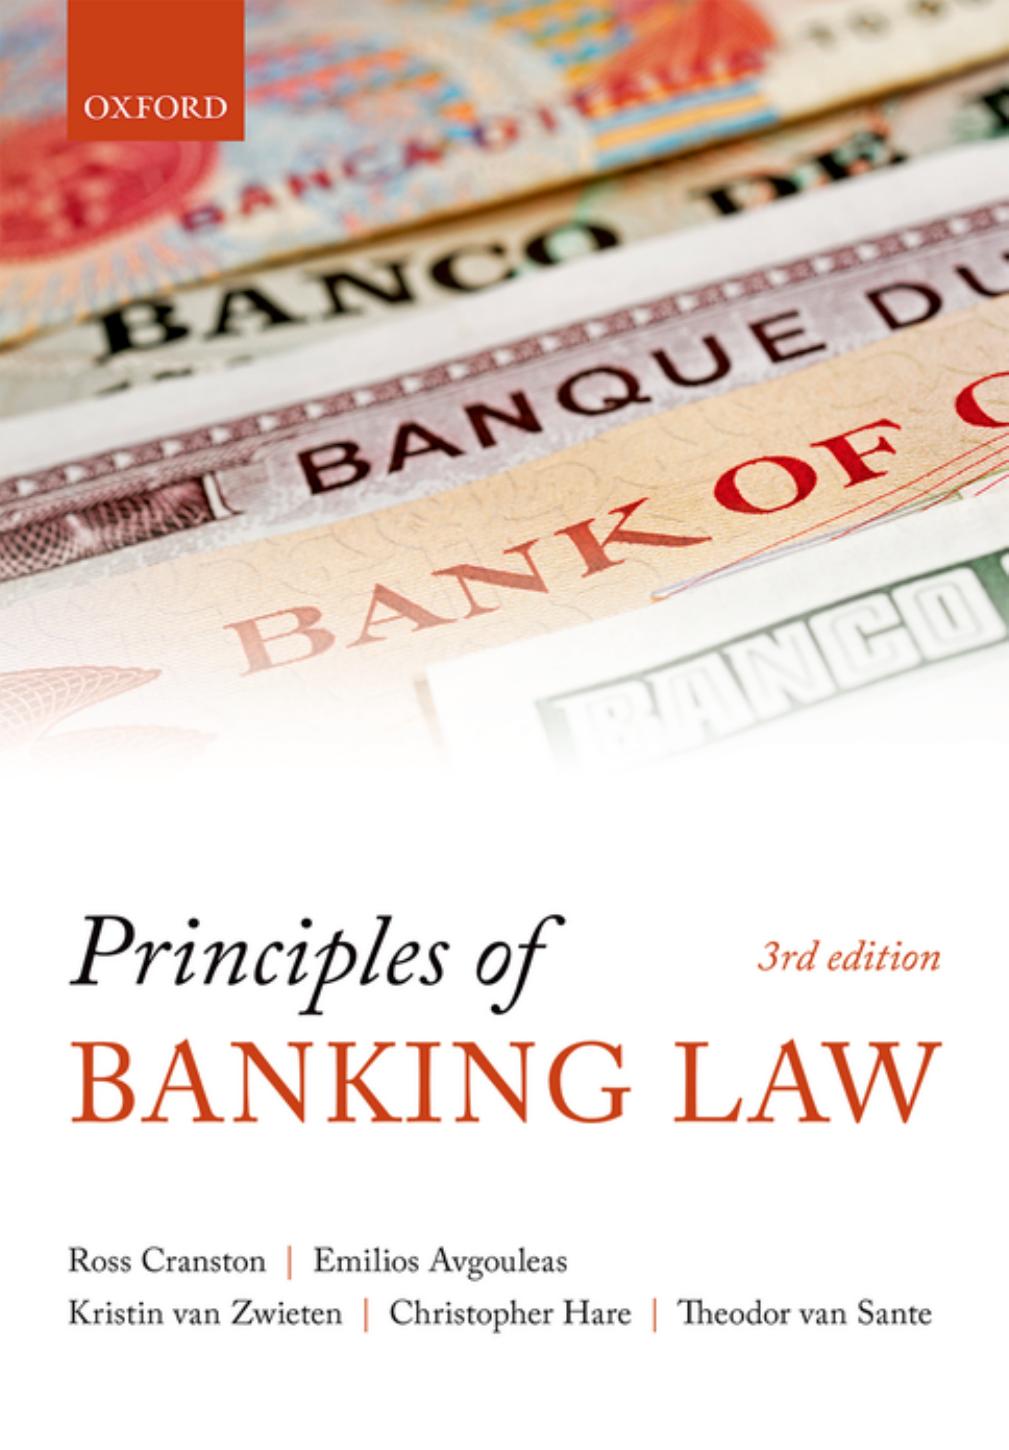 Principles of Banking Law 3rd Edition By Sir Ross Cranston 120Yuan.jpg